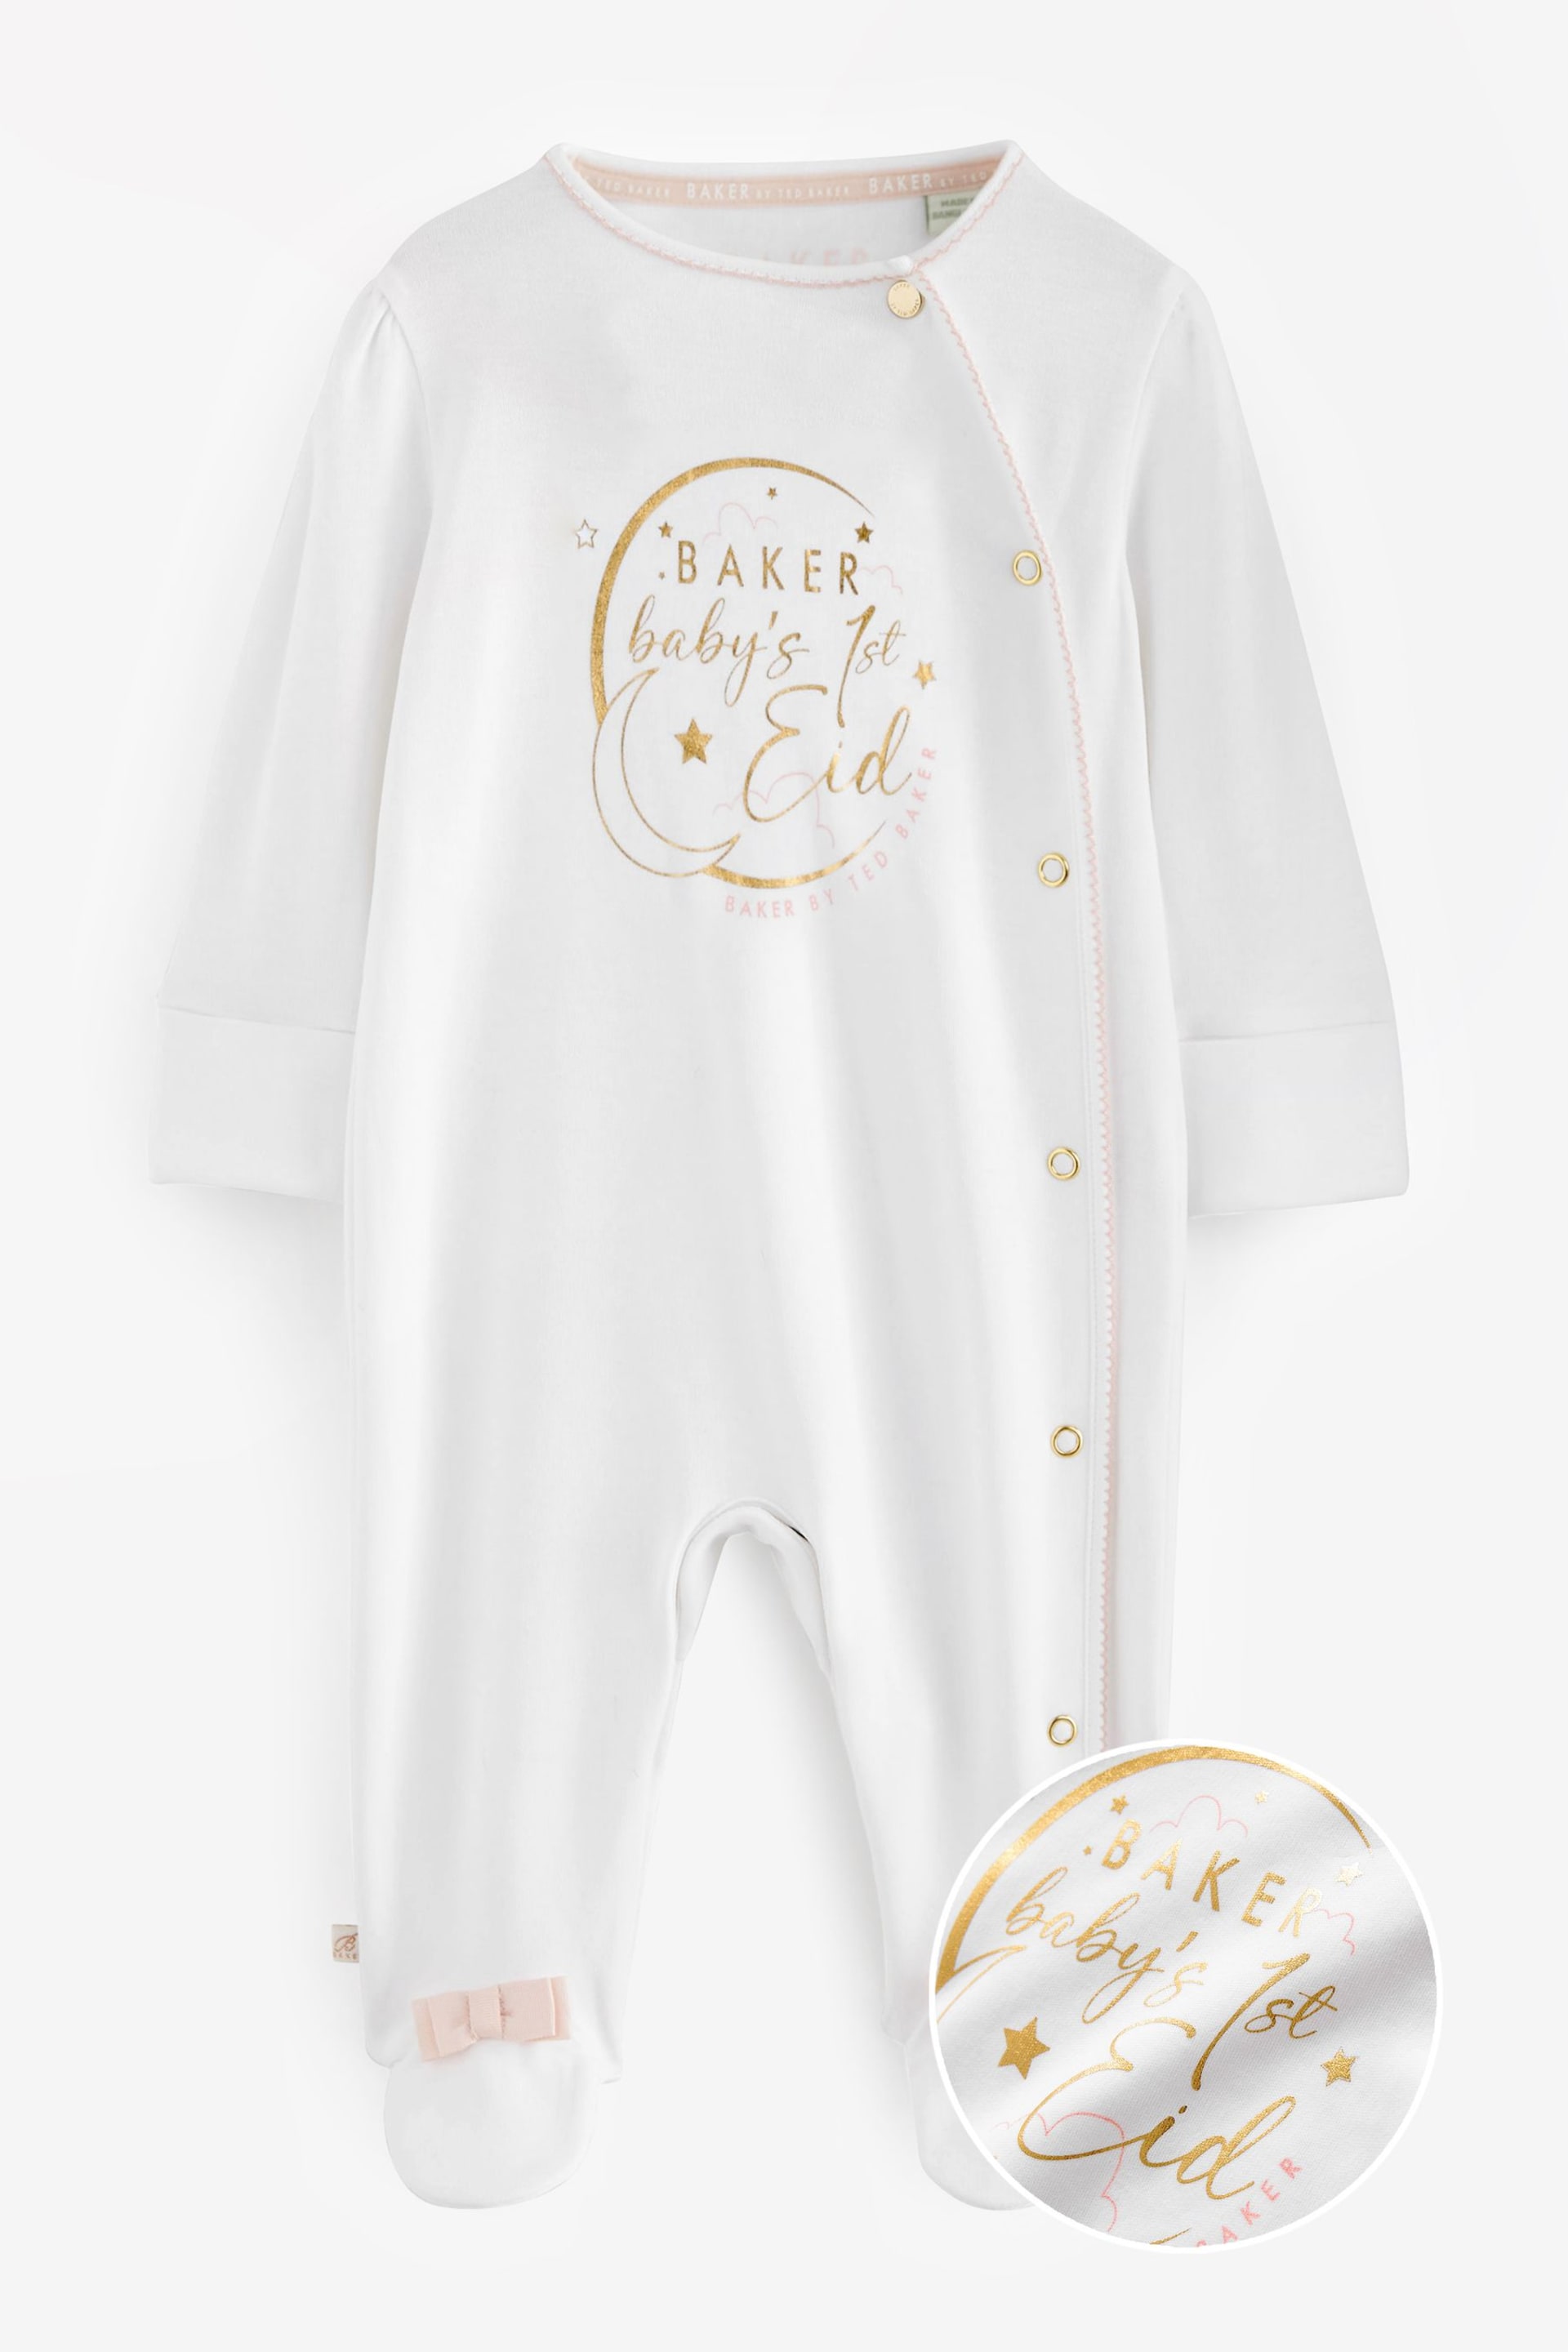 Baker by Ted Baker Babys First Eid Cotton White Sleepsuit - Image 2 of 7